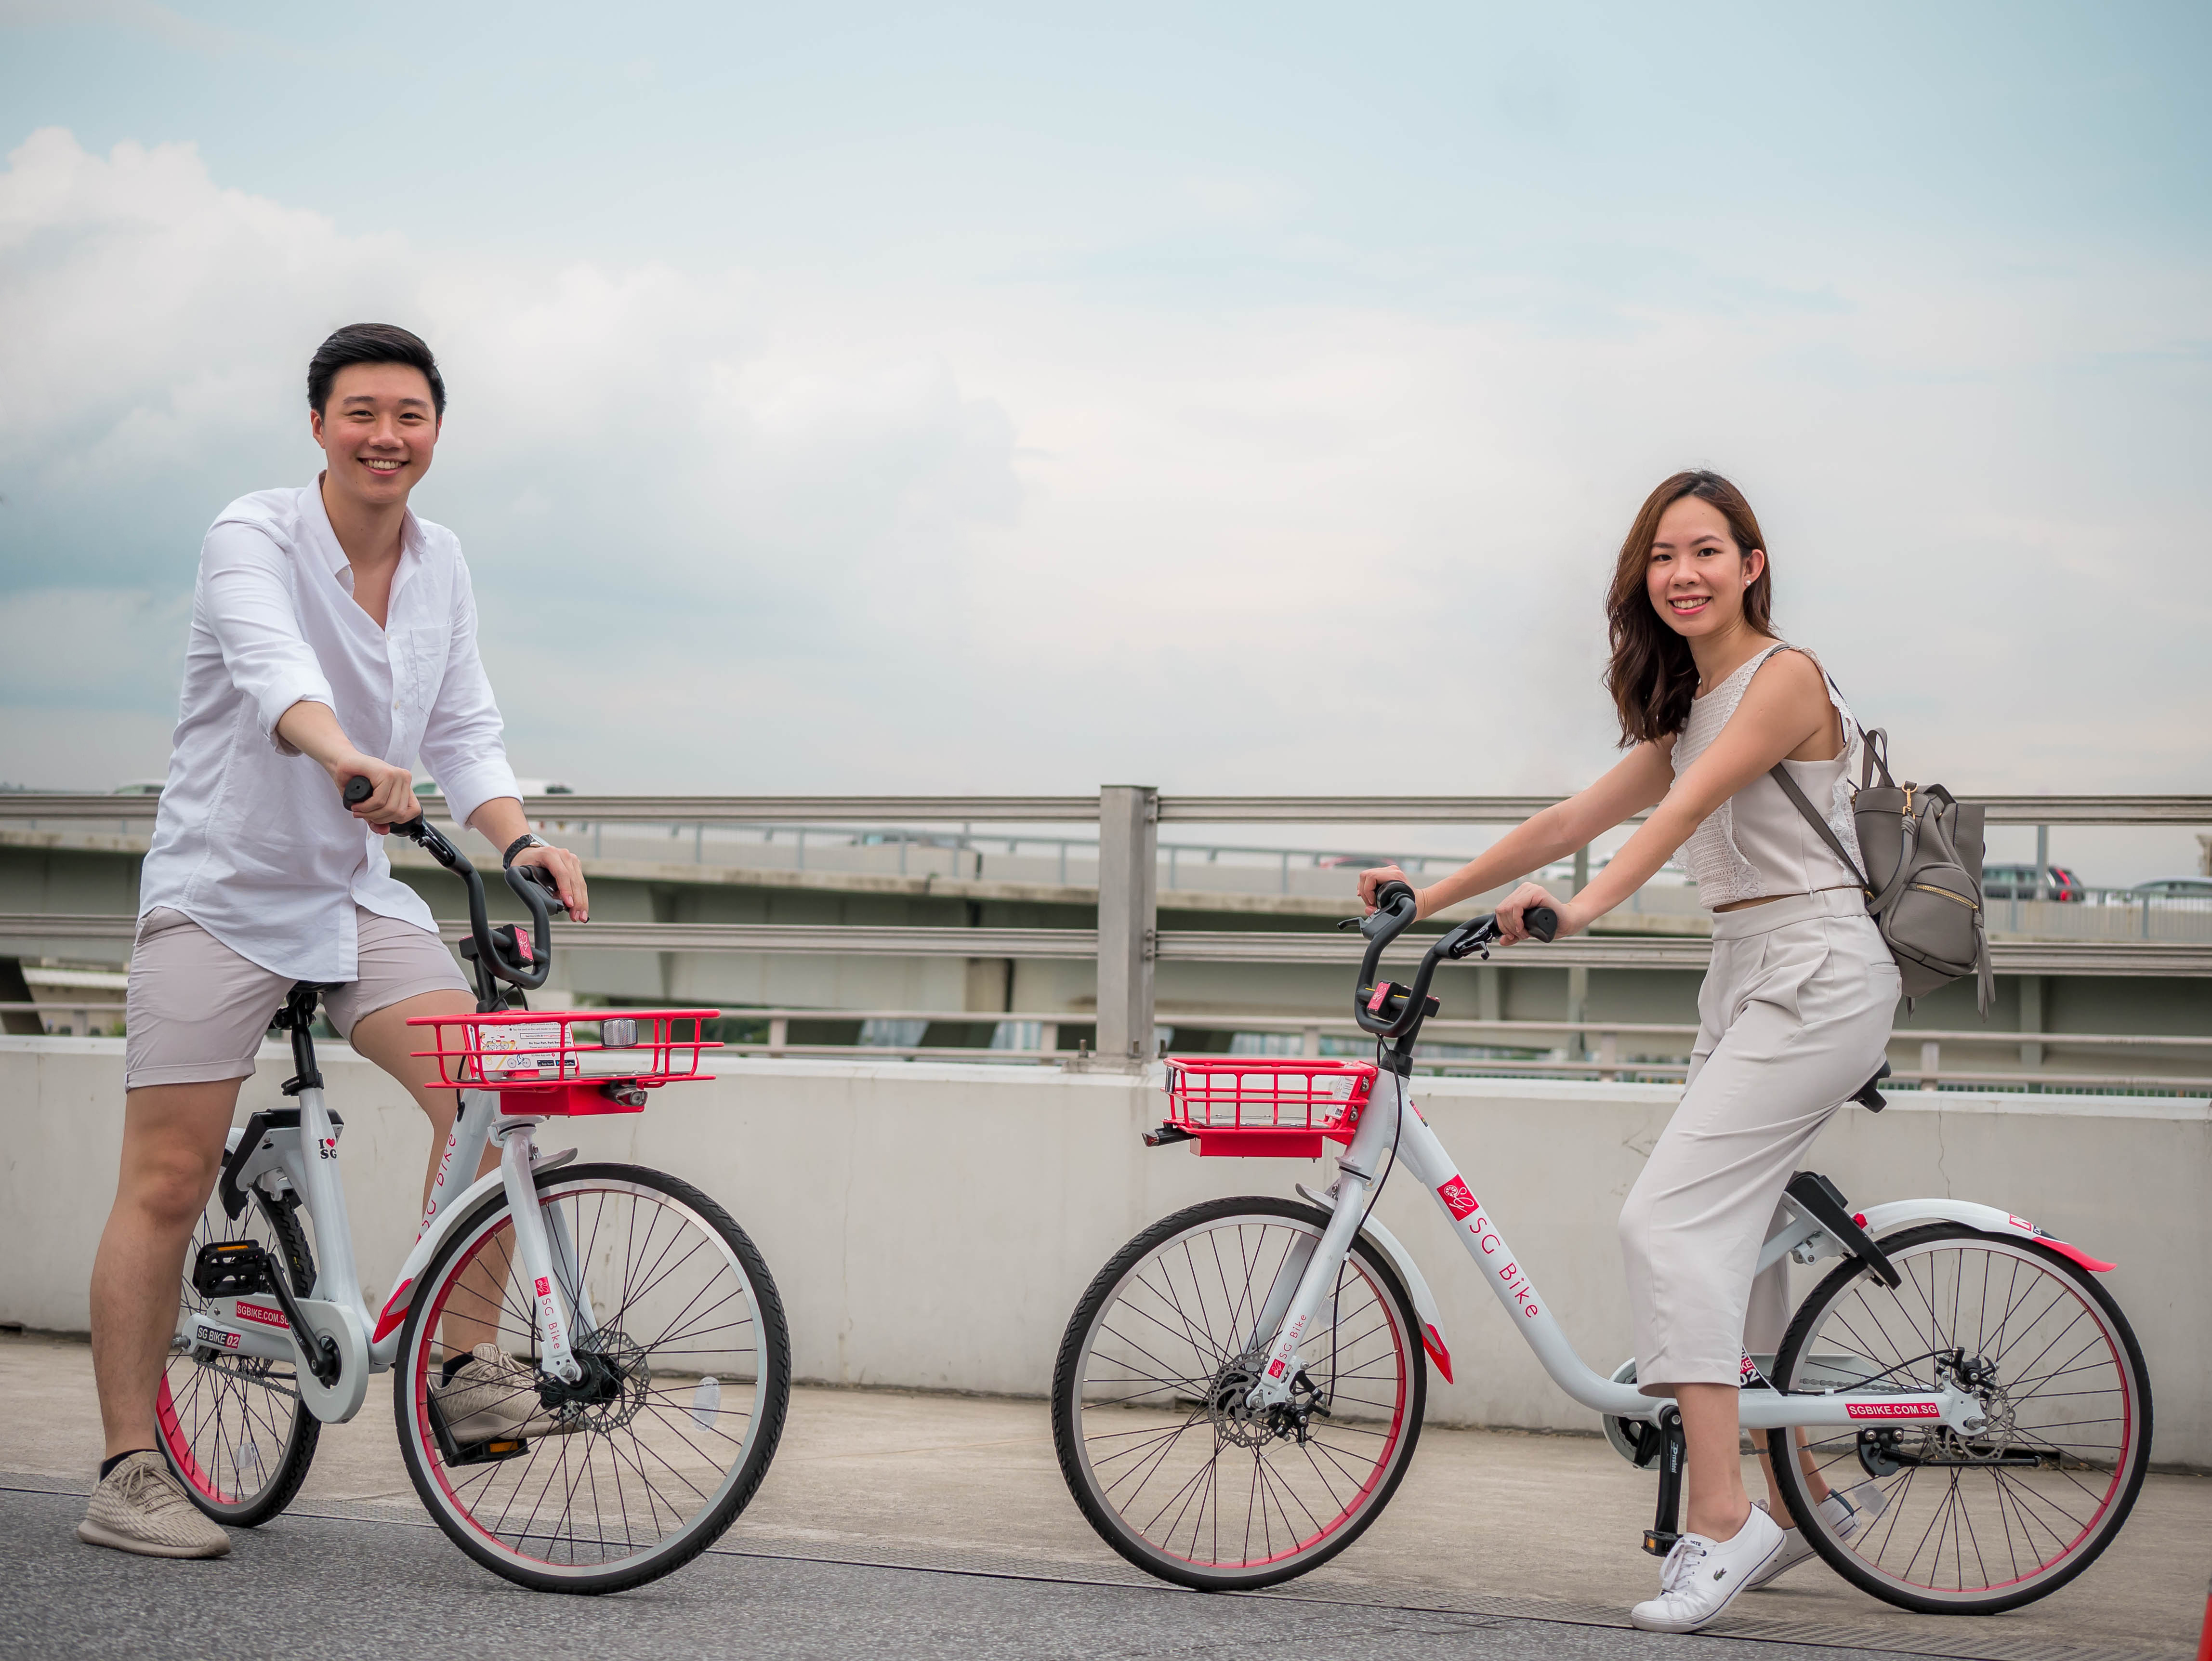 SG Bike buys Mobike’s license to operate in Singapore